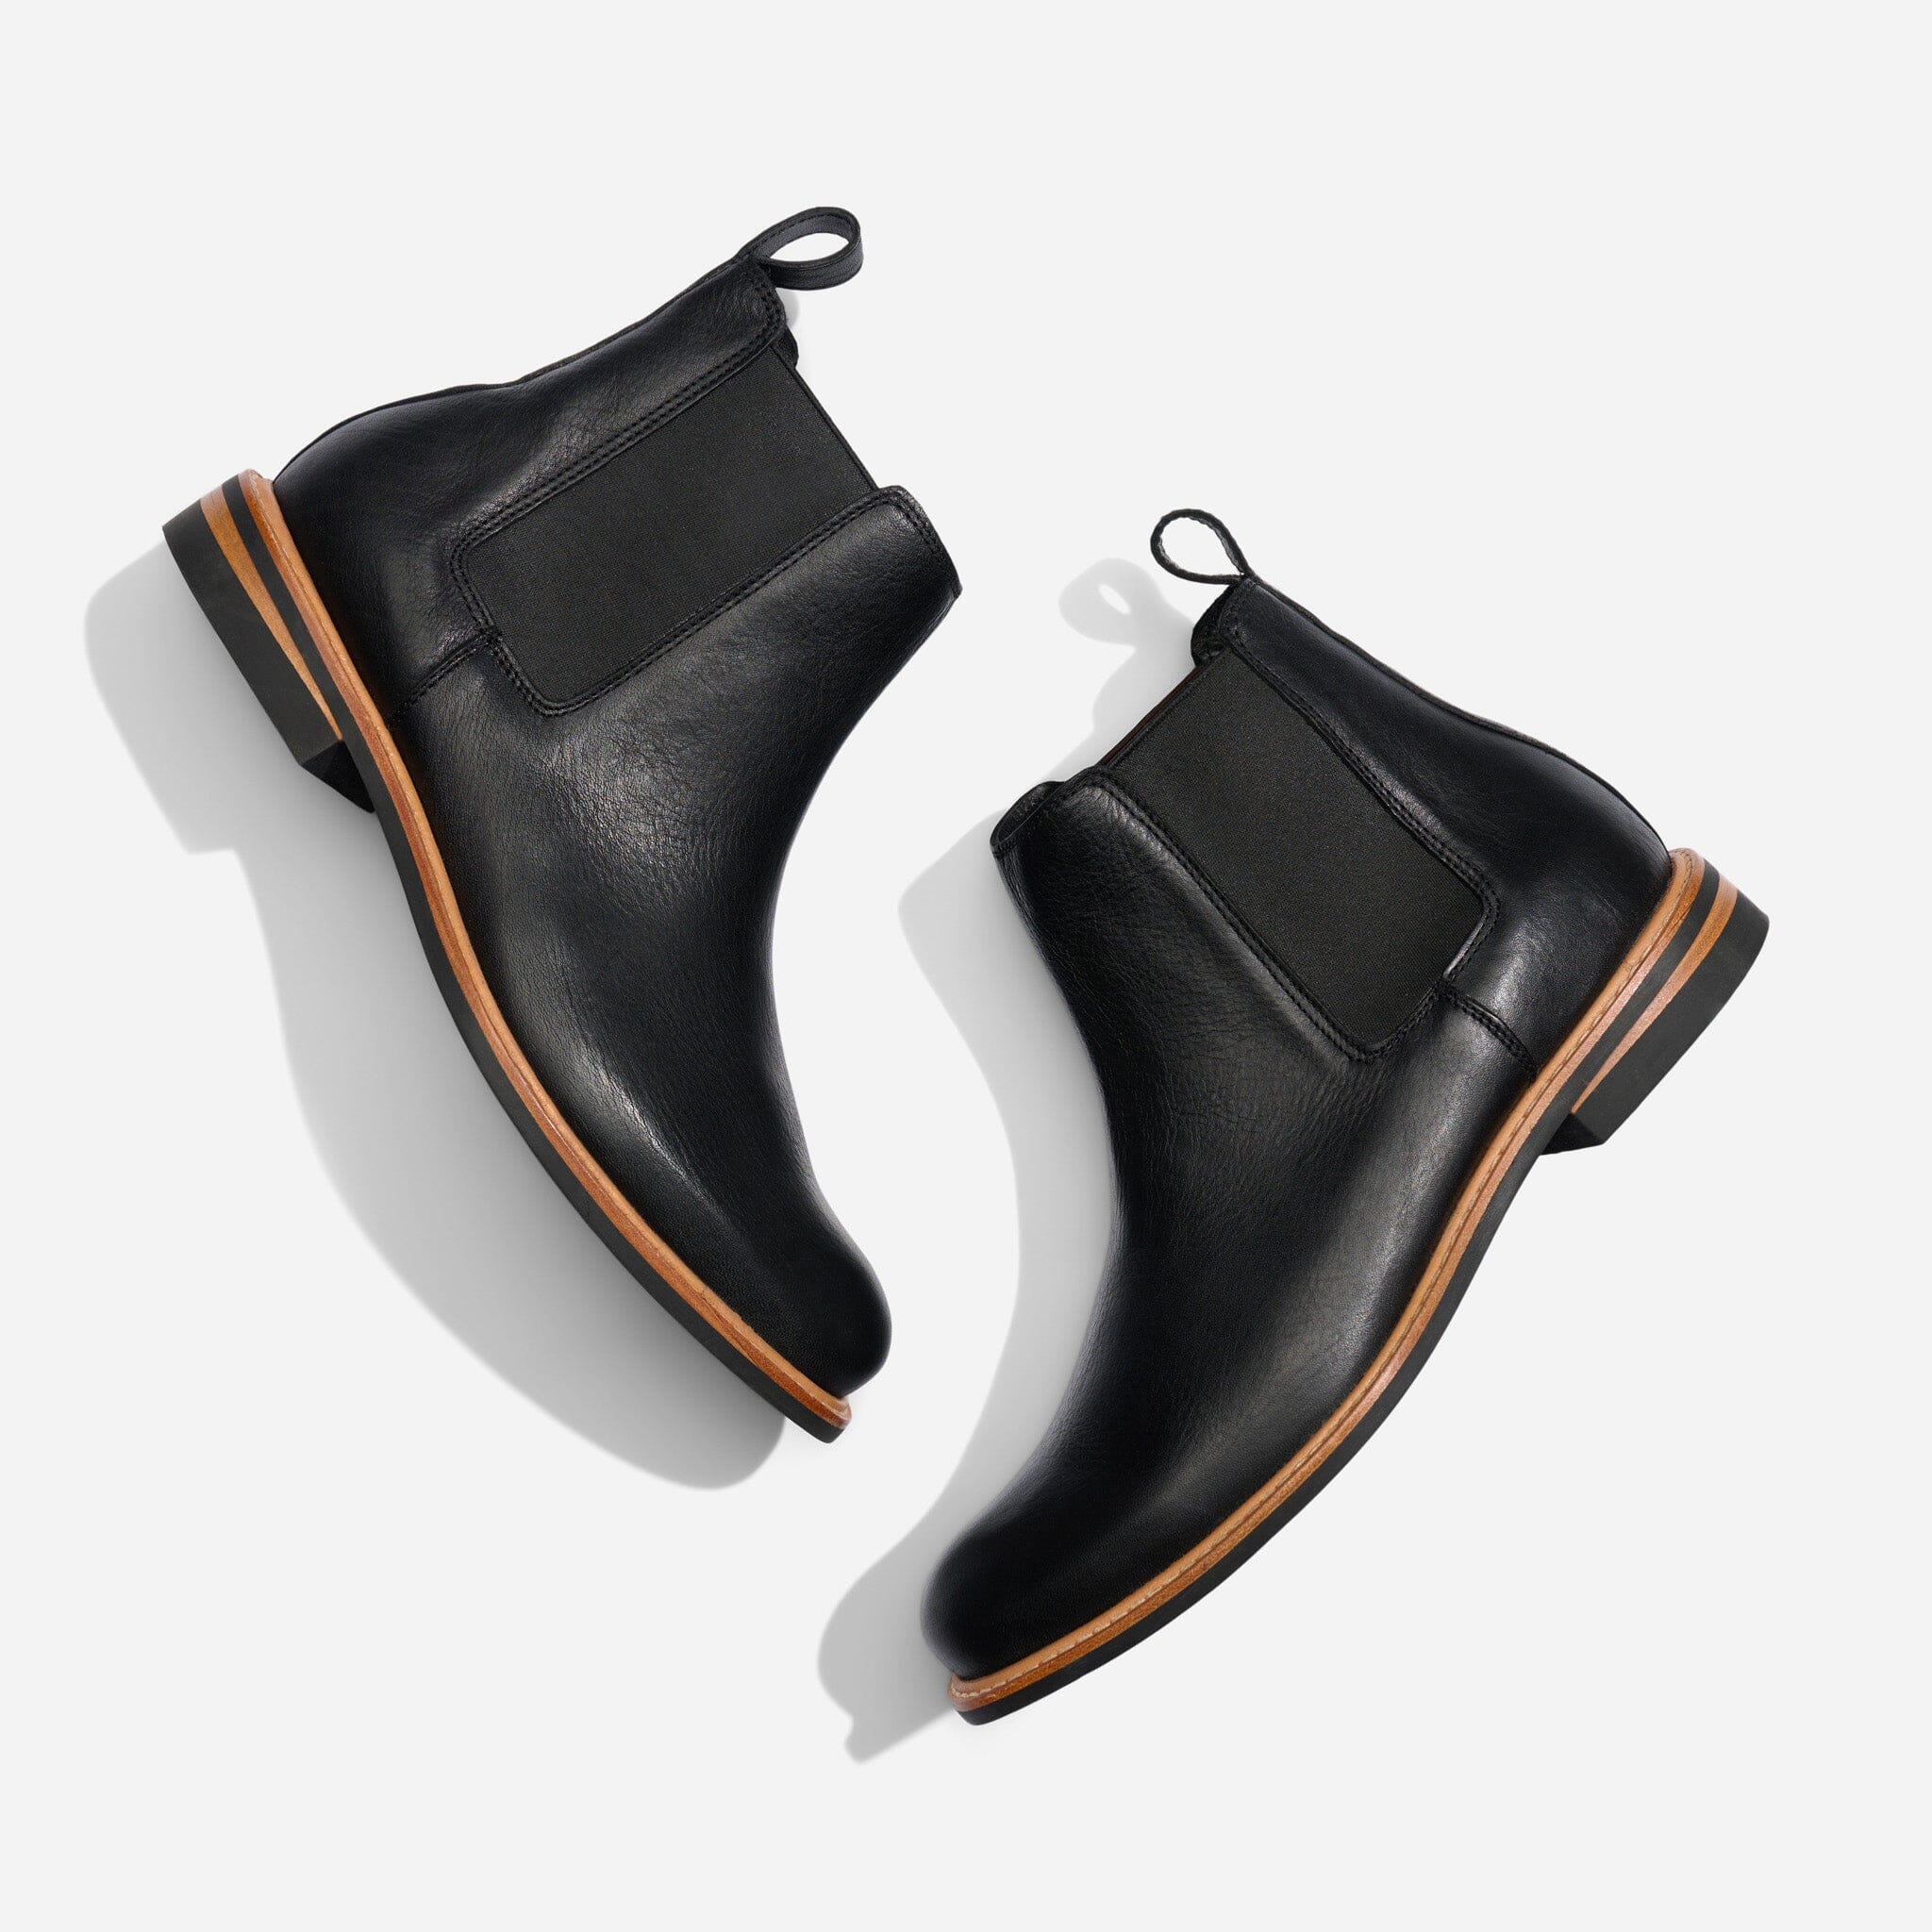 All-Weather Chelsea Boot Black Men's Leather Boot Nisolo 